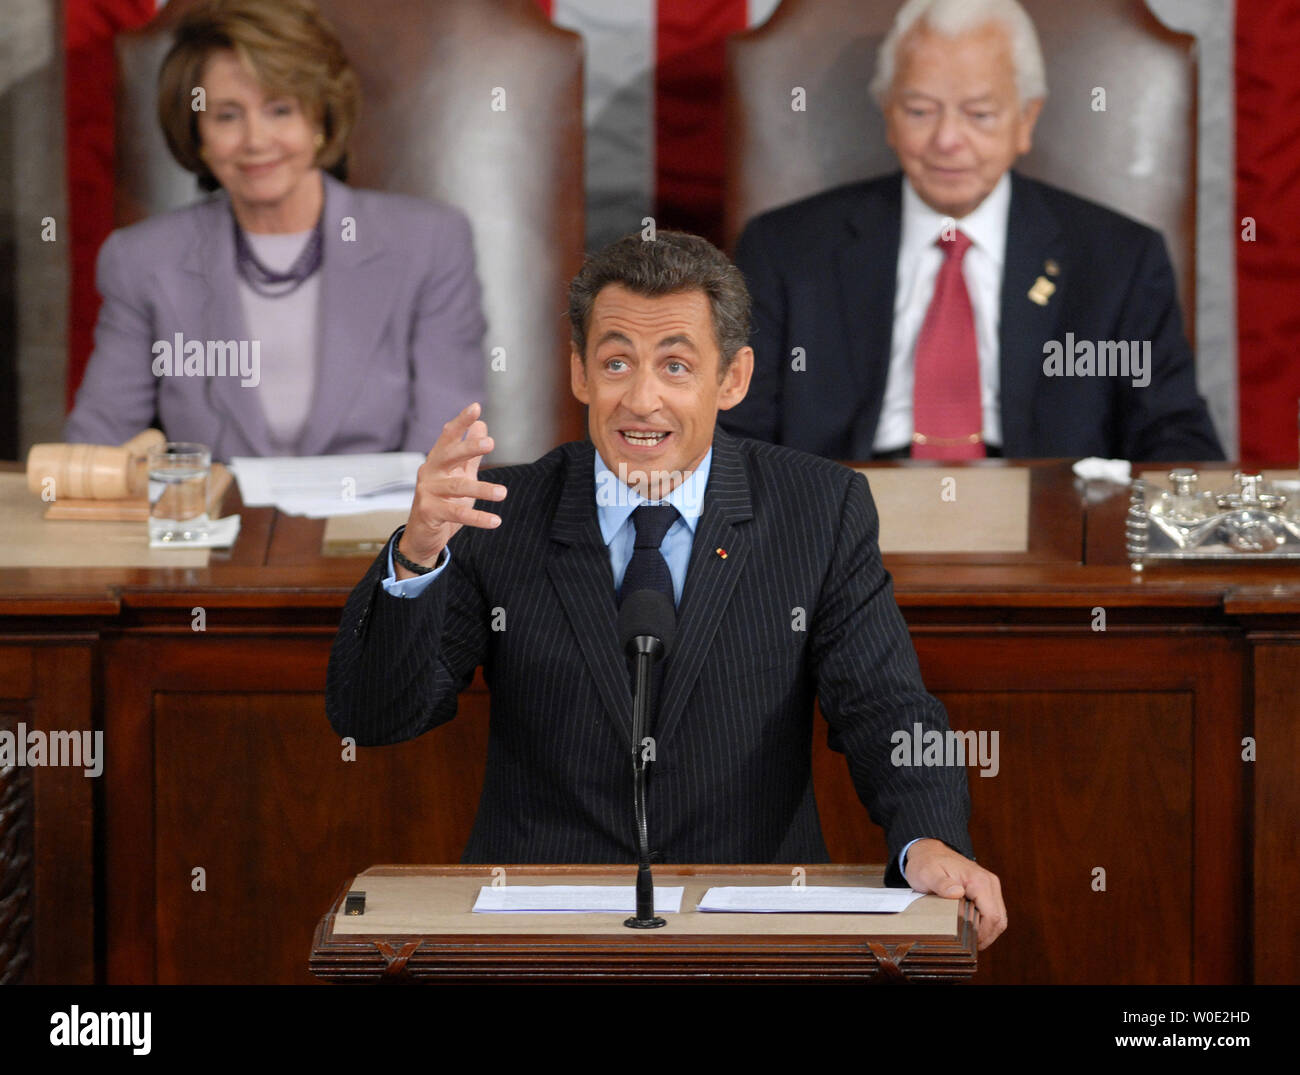 French President Nicolas Sarkozy addresses a joint meeting of Congress at the Capitol Building in Washington on November 7, 2007. Speaker of the House Nancy Pelosi and Senate President Pro Tempore Robert Byrd (D-WV) watched on. (UPI Photo/Kevin Dietsch) Stock Photo